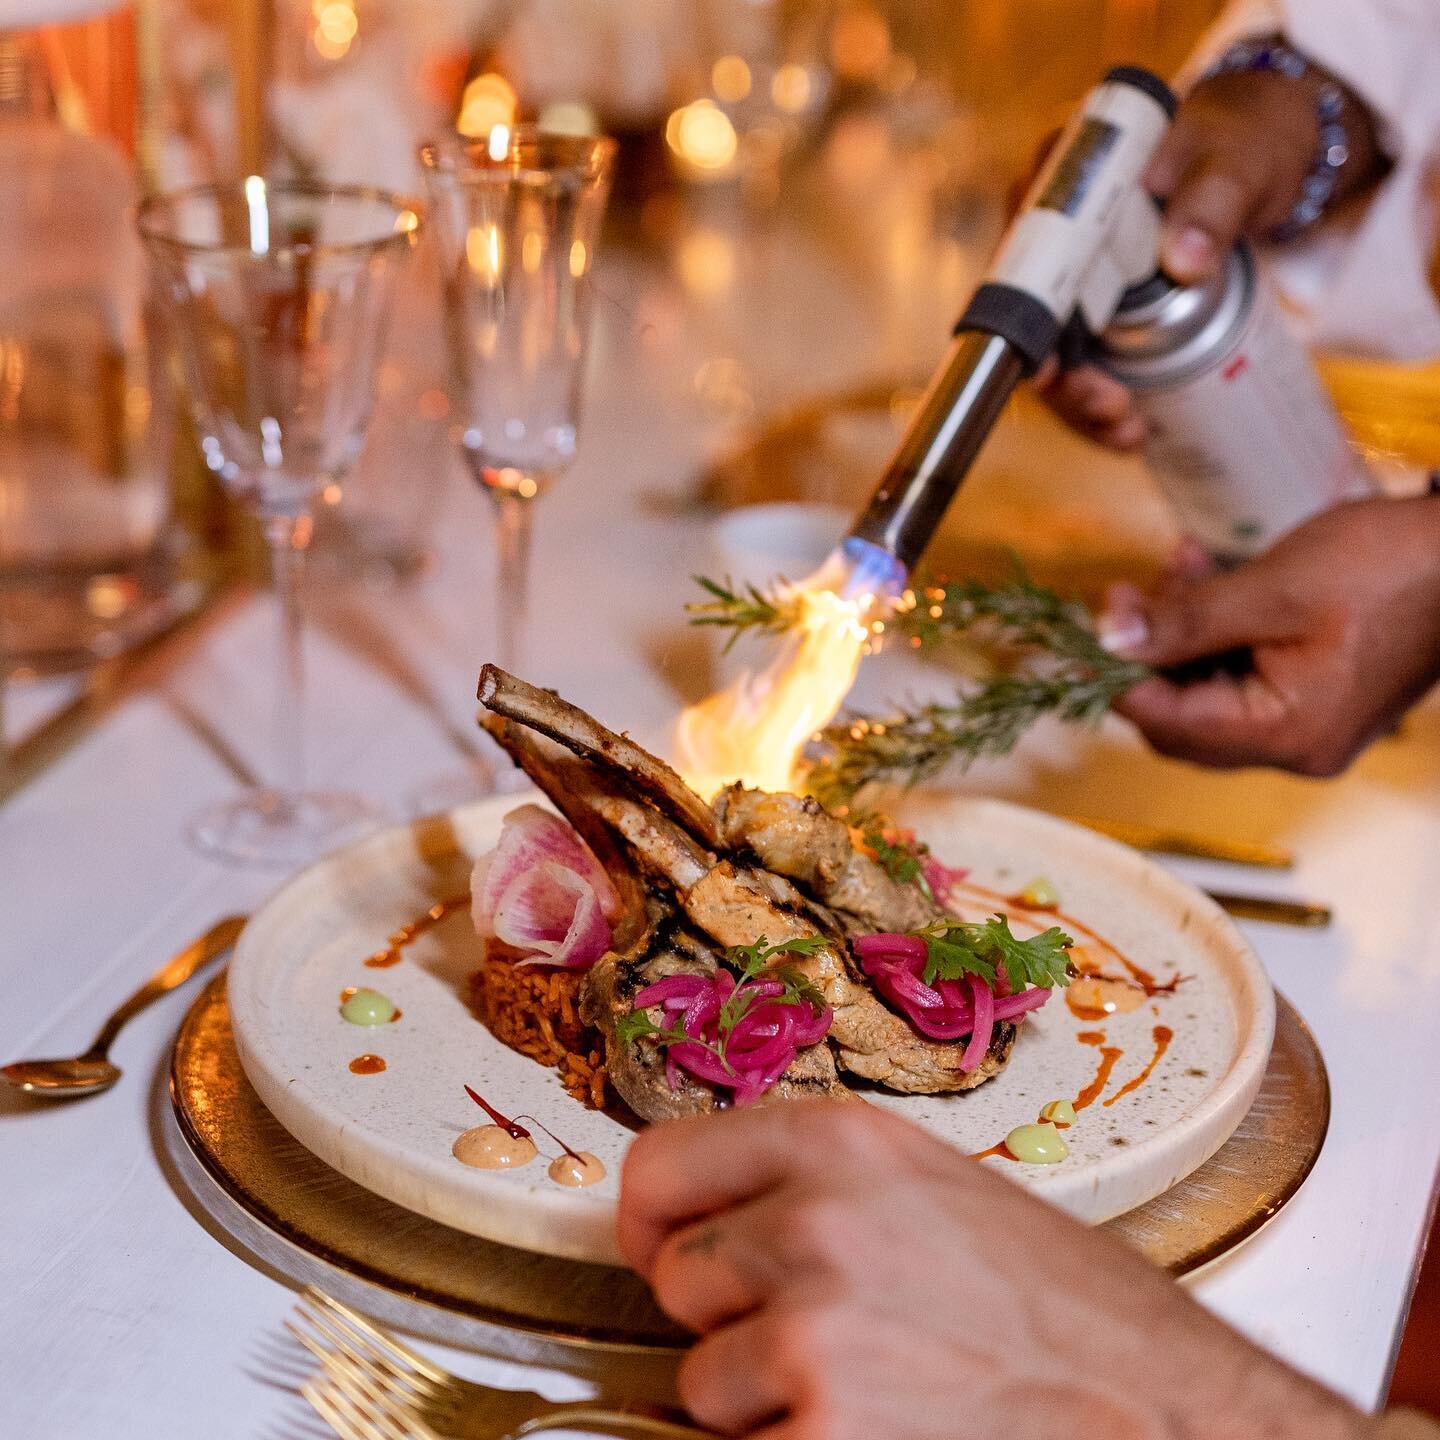 great F O O D is the foundation of genuine happiness, and nothing says forever after like our table side lamb-chops
&hellip;&hellip;
thank you to our creative partners at this Cabo destination wedding:
Venue: @fsloscabos
Planner: @palmsweddingsandeve